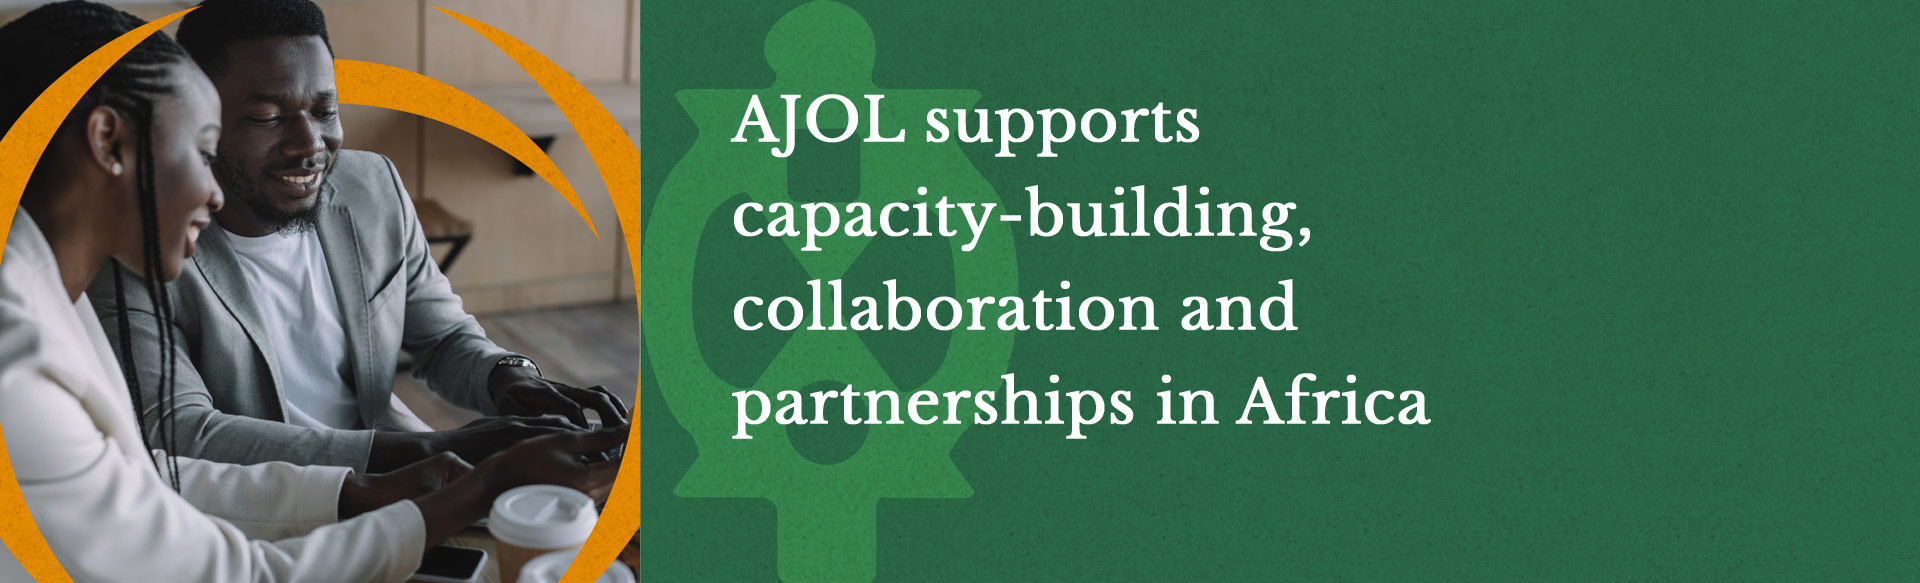 AJOL supports capacity-building, collaboration and partnerships in Africa